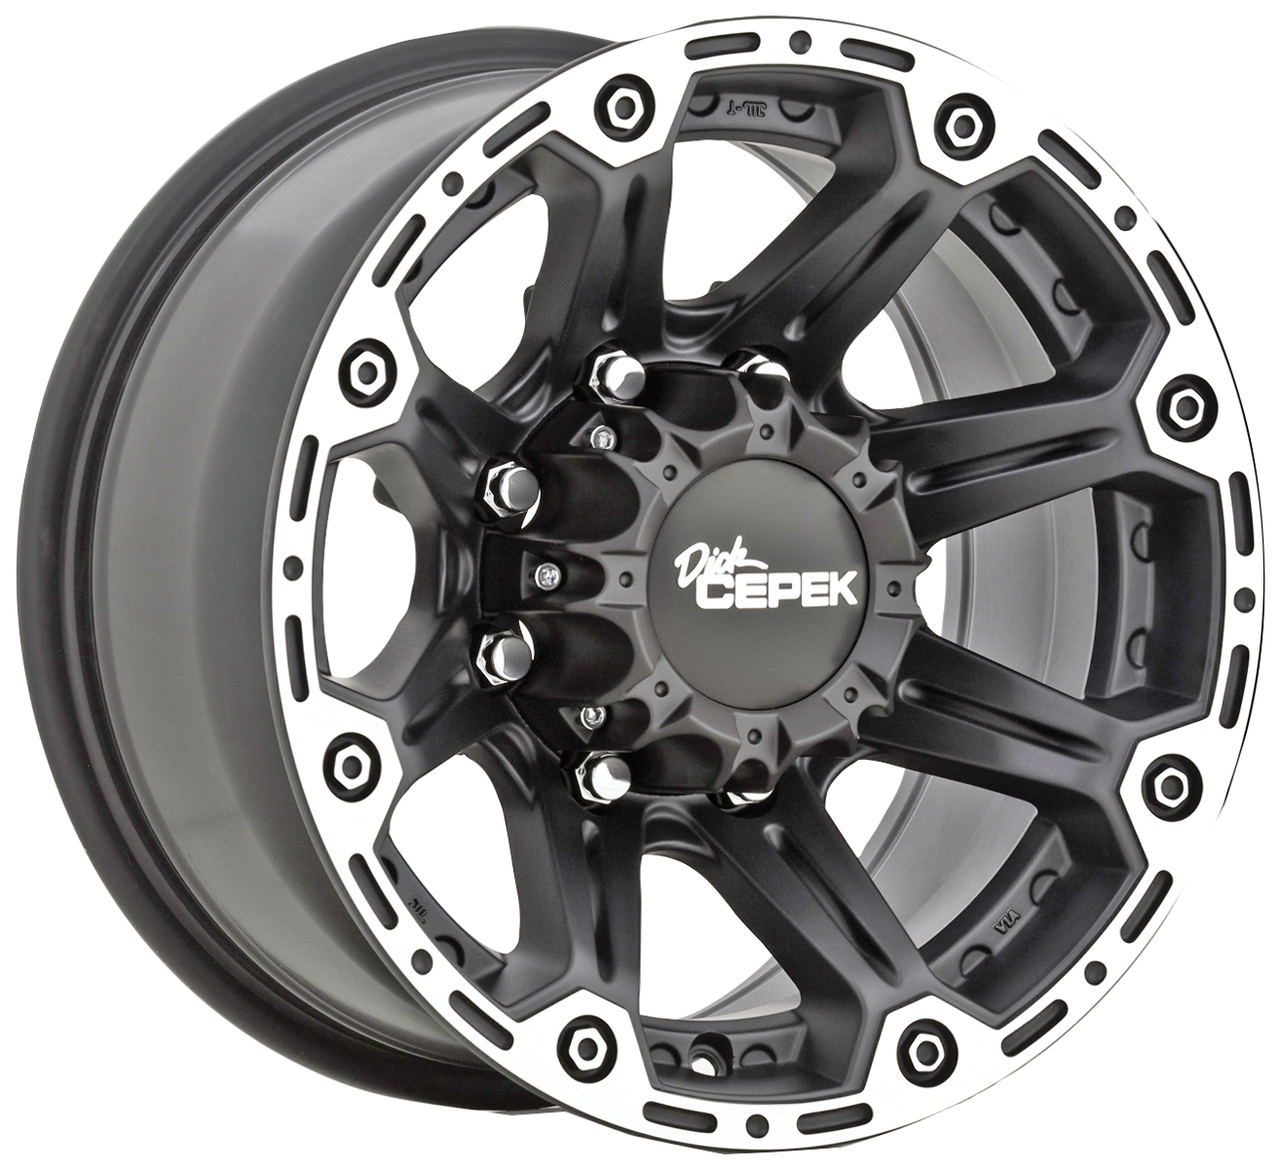 Set 4 17" Dick Cepek Torque flat black with machined outer lip and satin clear coat 17x8.5 Wheels 6x5.50 +06mm